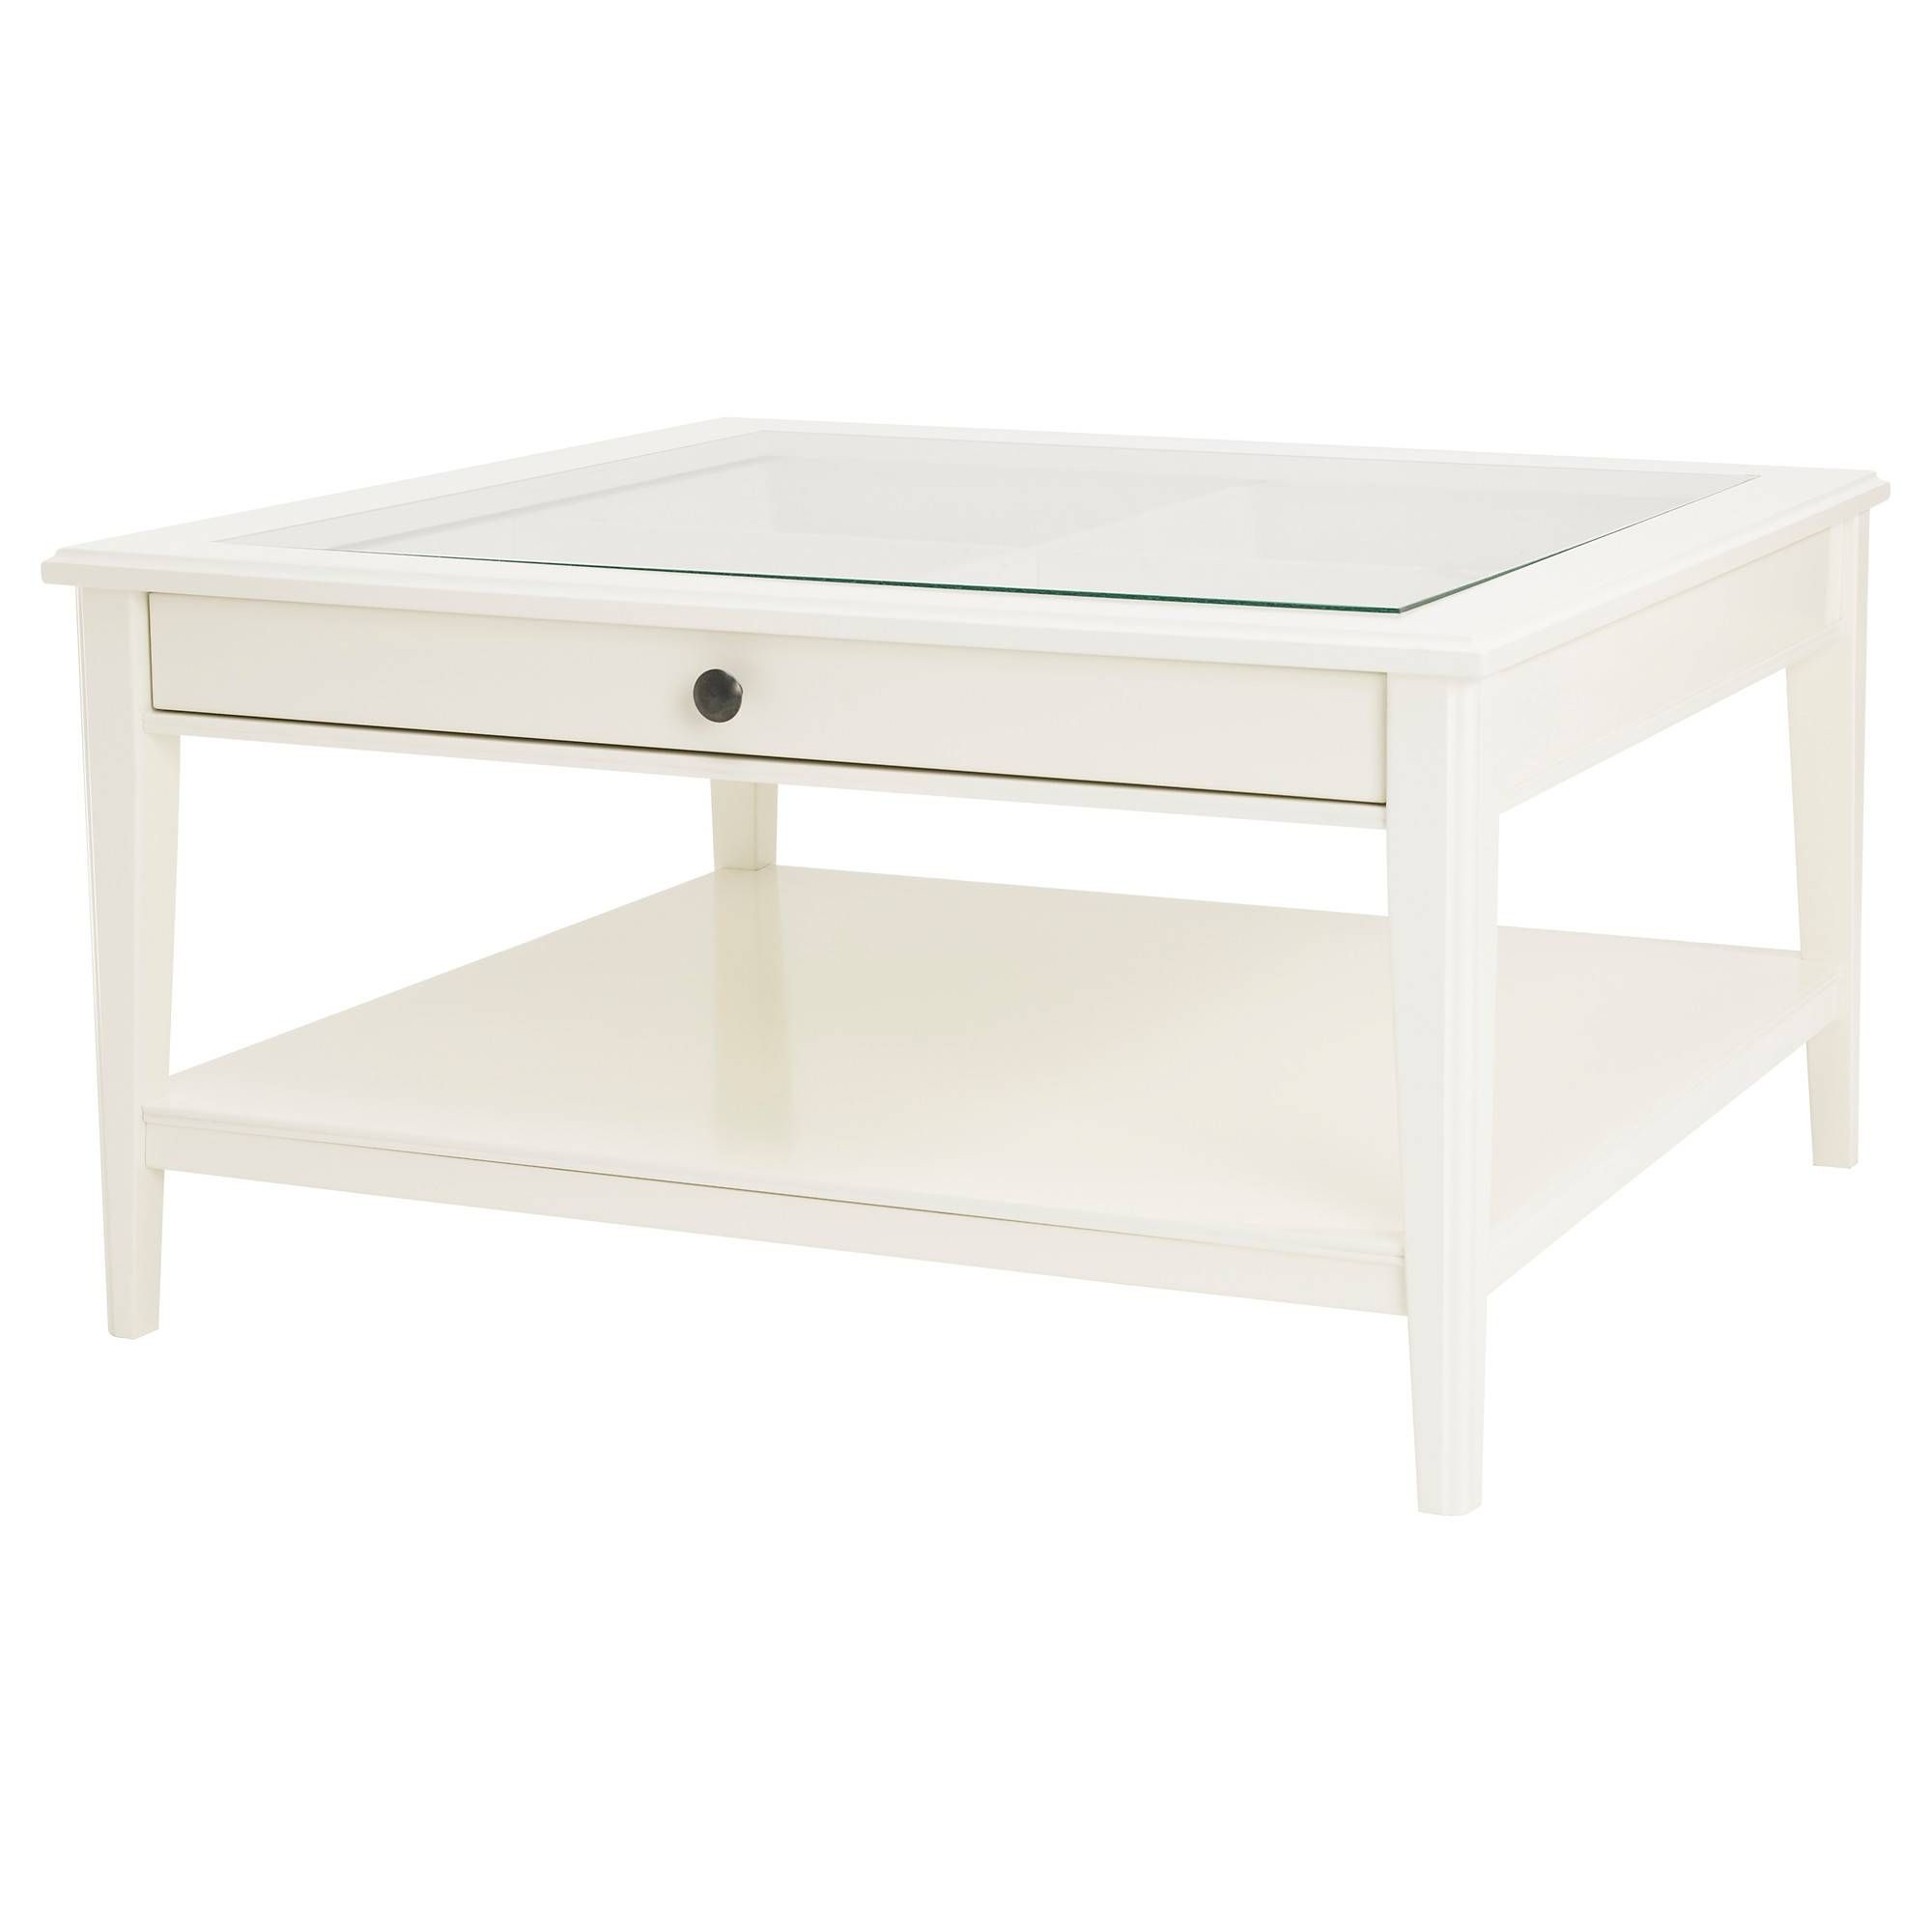 Liatorp Coffee Table White/glass 93x93 Cm – Ikea With Regard To White And Glass Coffee Tables (View 1 of 30)